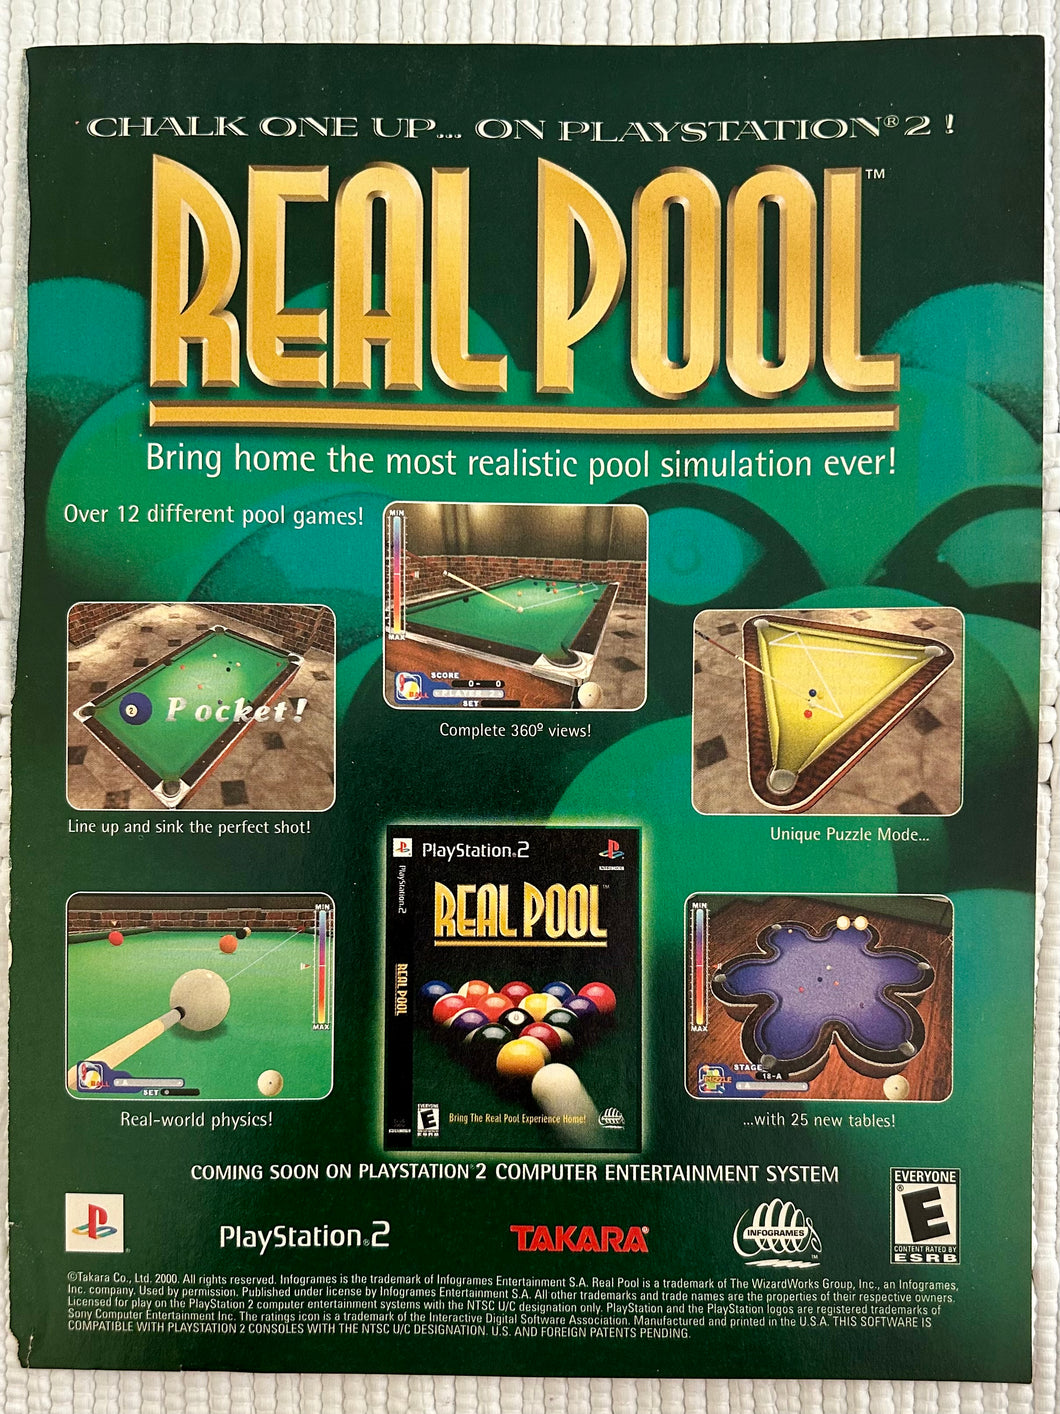 Real Pool - PS2 - Original Vintage Advertisement - Print Ads - Laminated A4 Poster